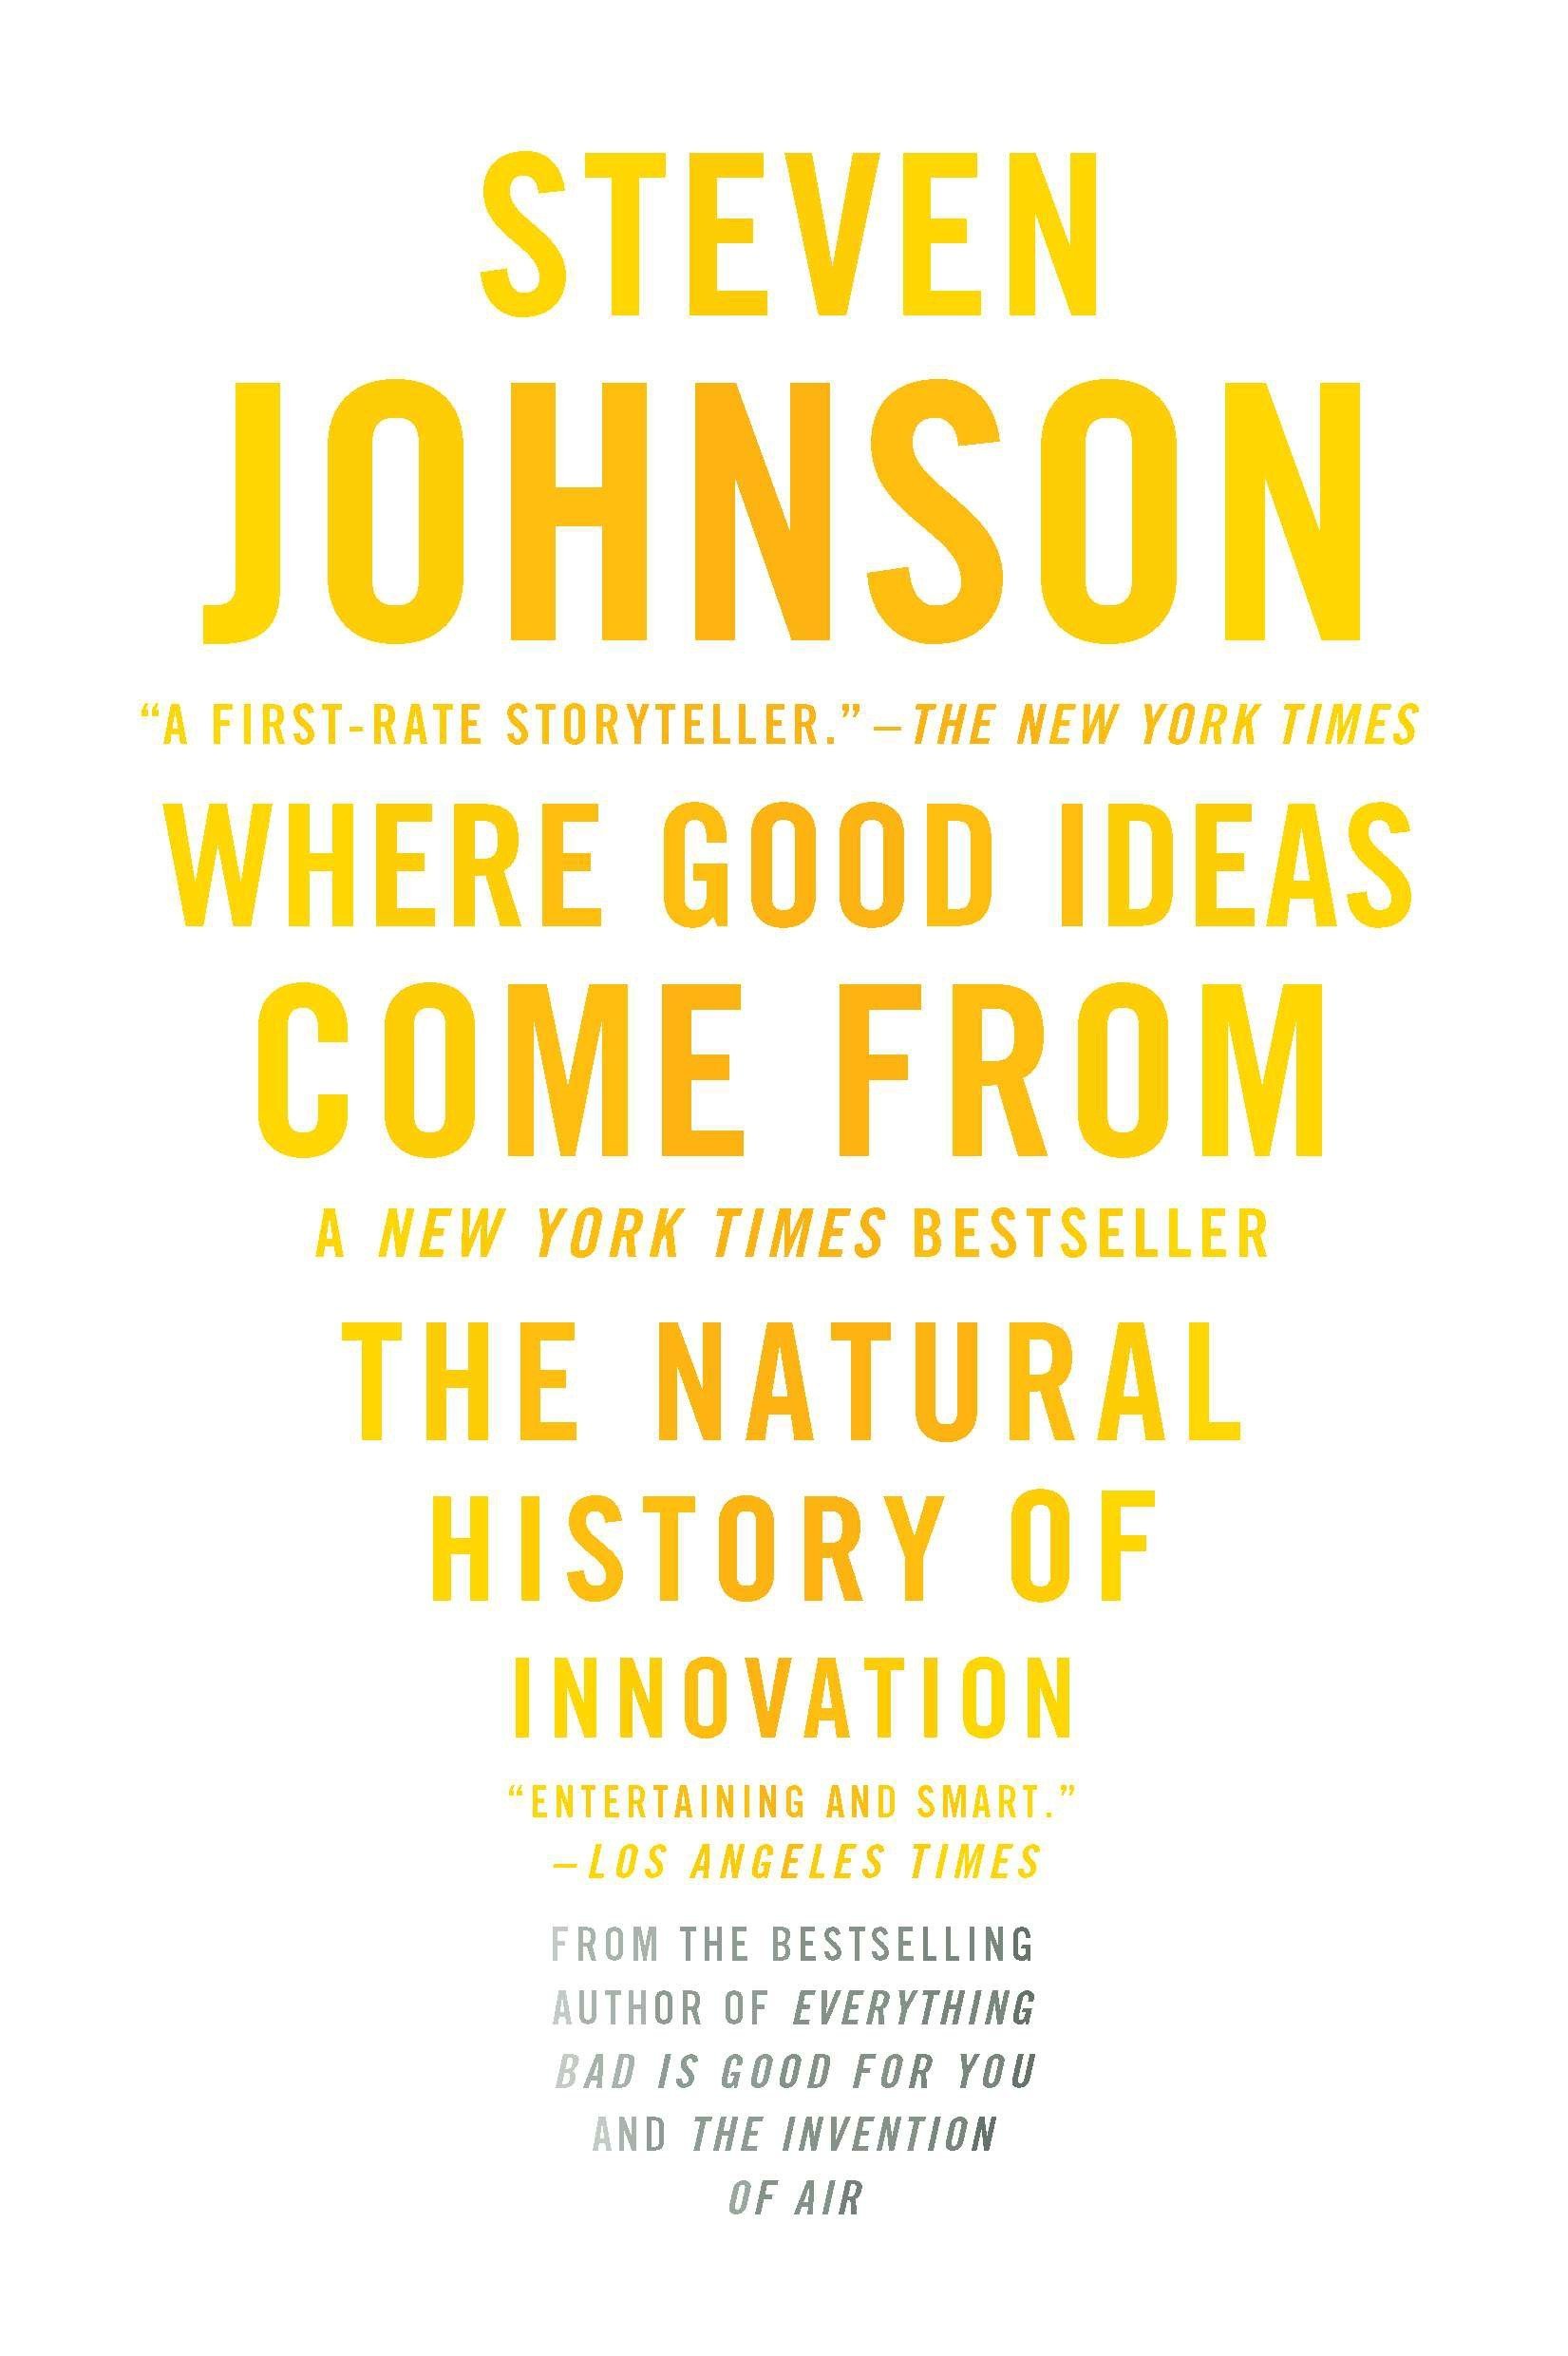 Where Good Ideas Come From by Steven Johnson